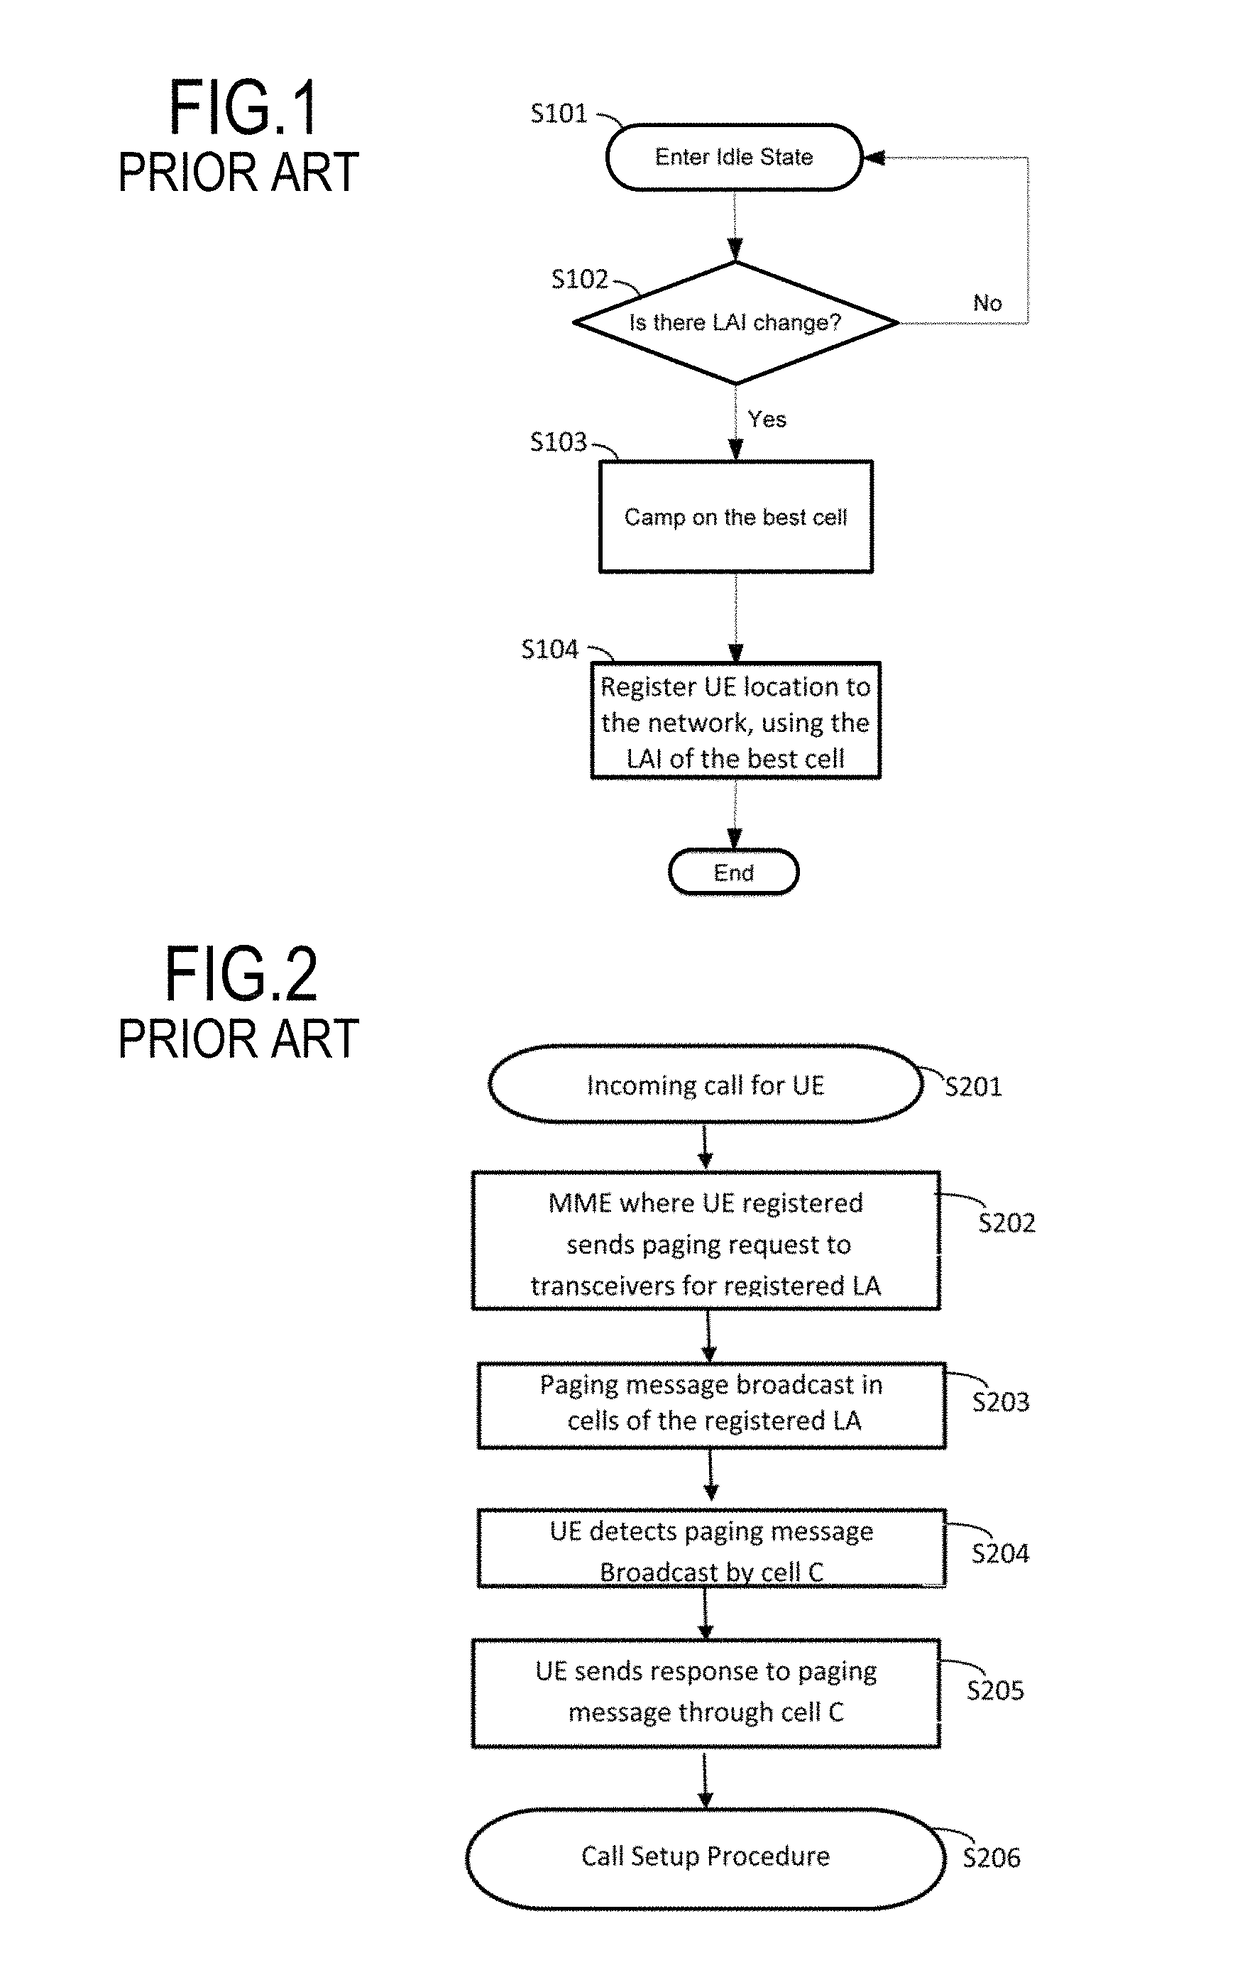 Paging in mobile networks using independent paging cells and access cells